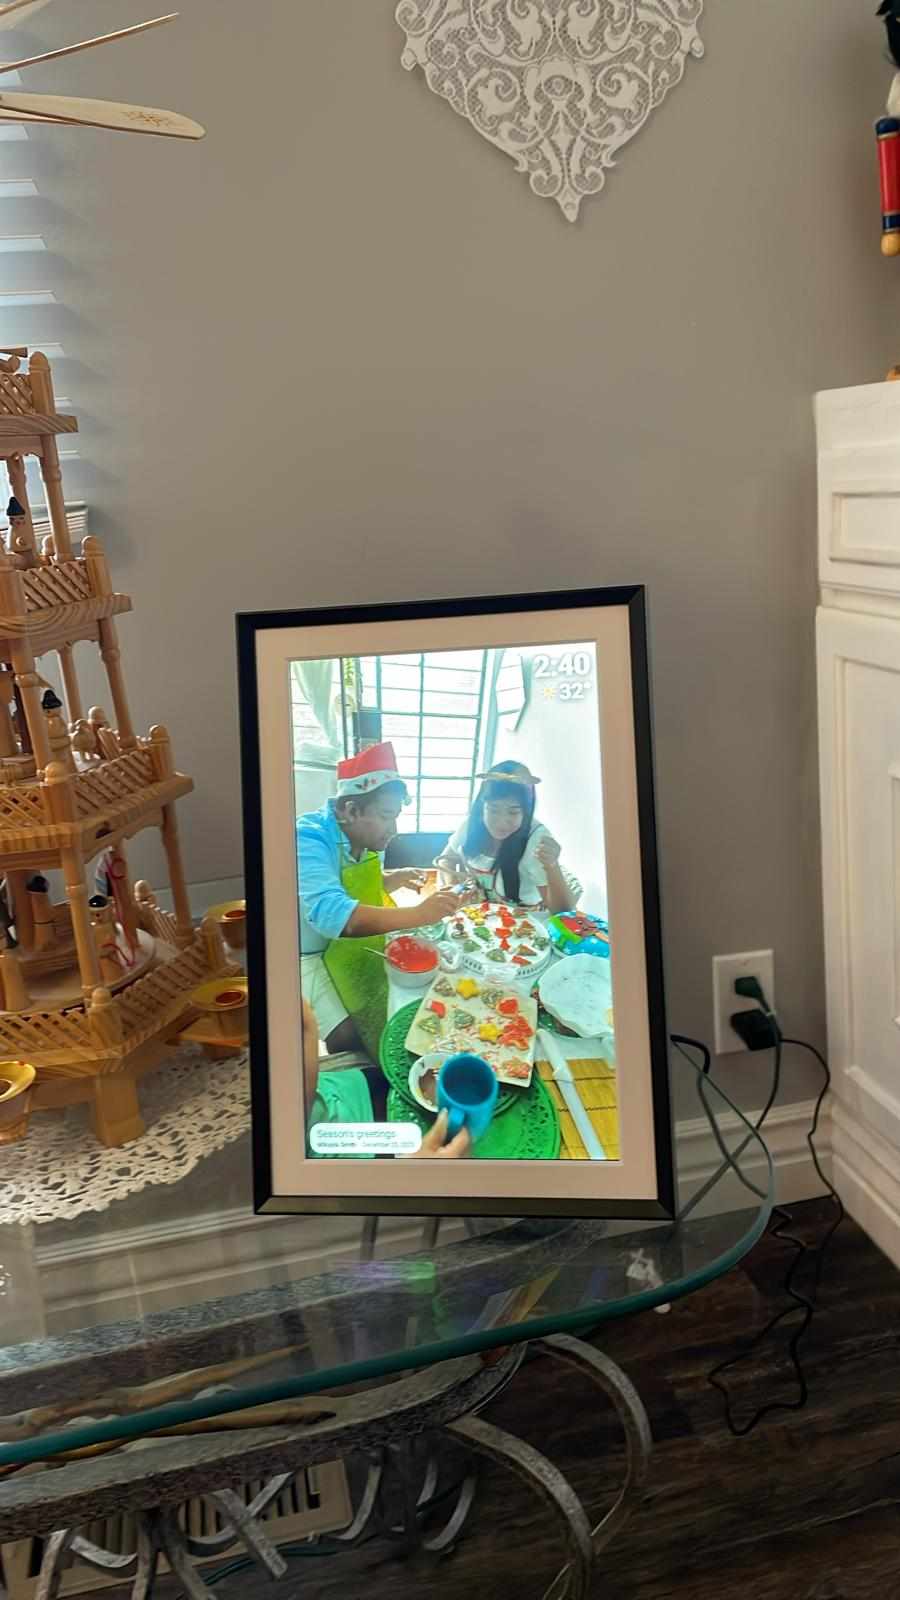 The Frameo digital photo frame makes the perfect Valentine's Day gift for anyone you love.